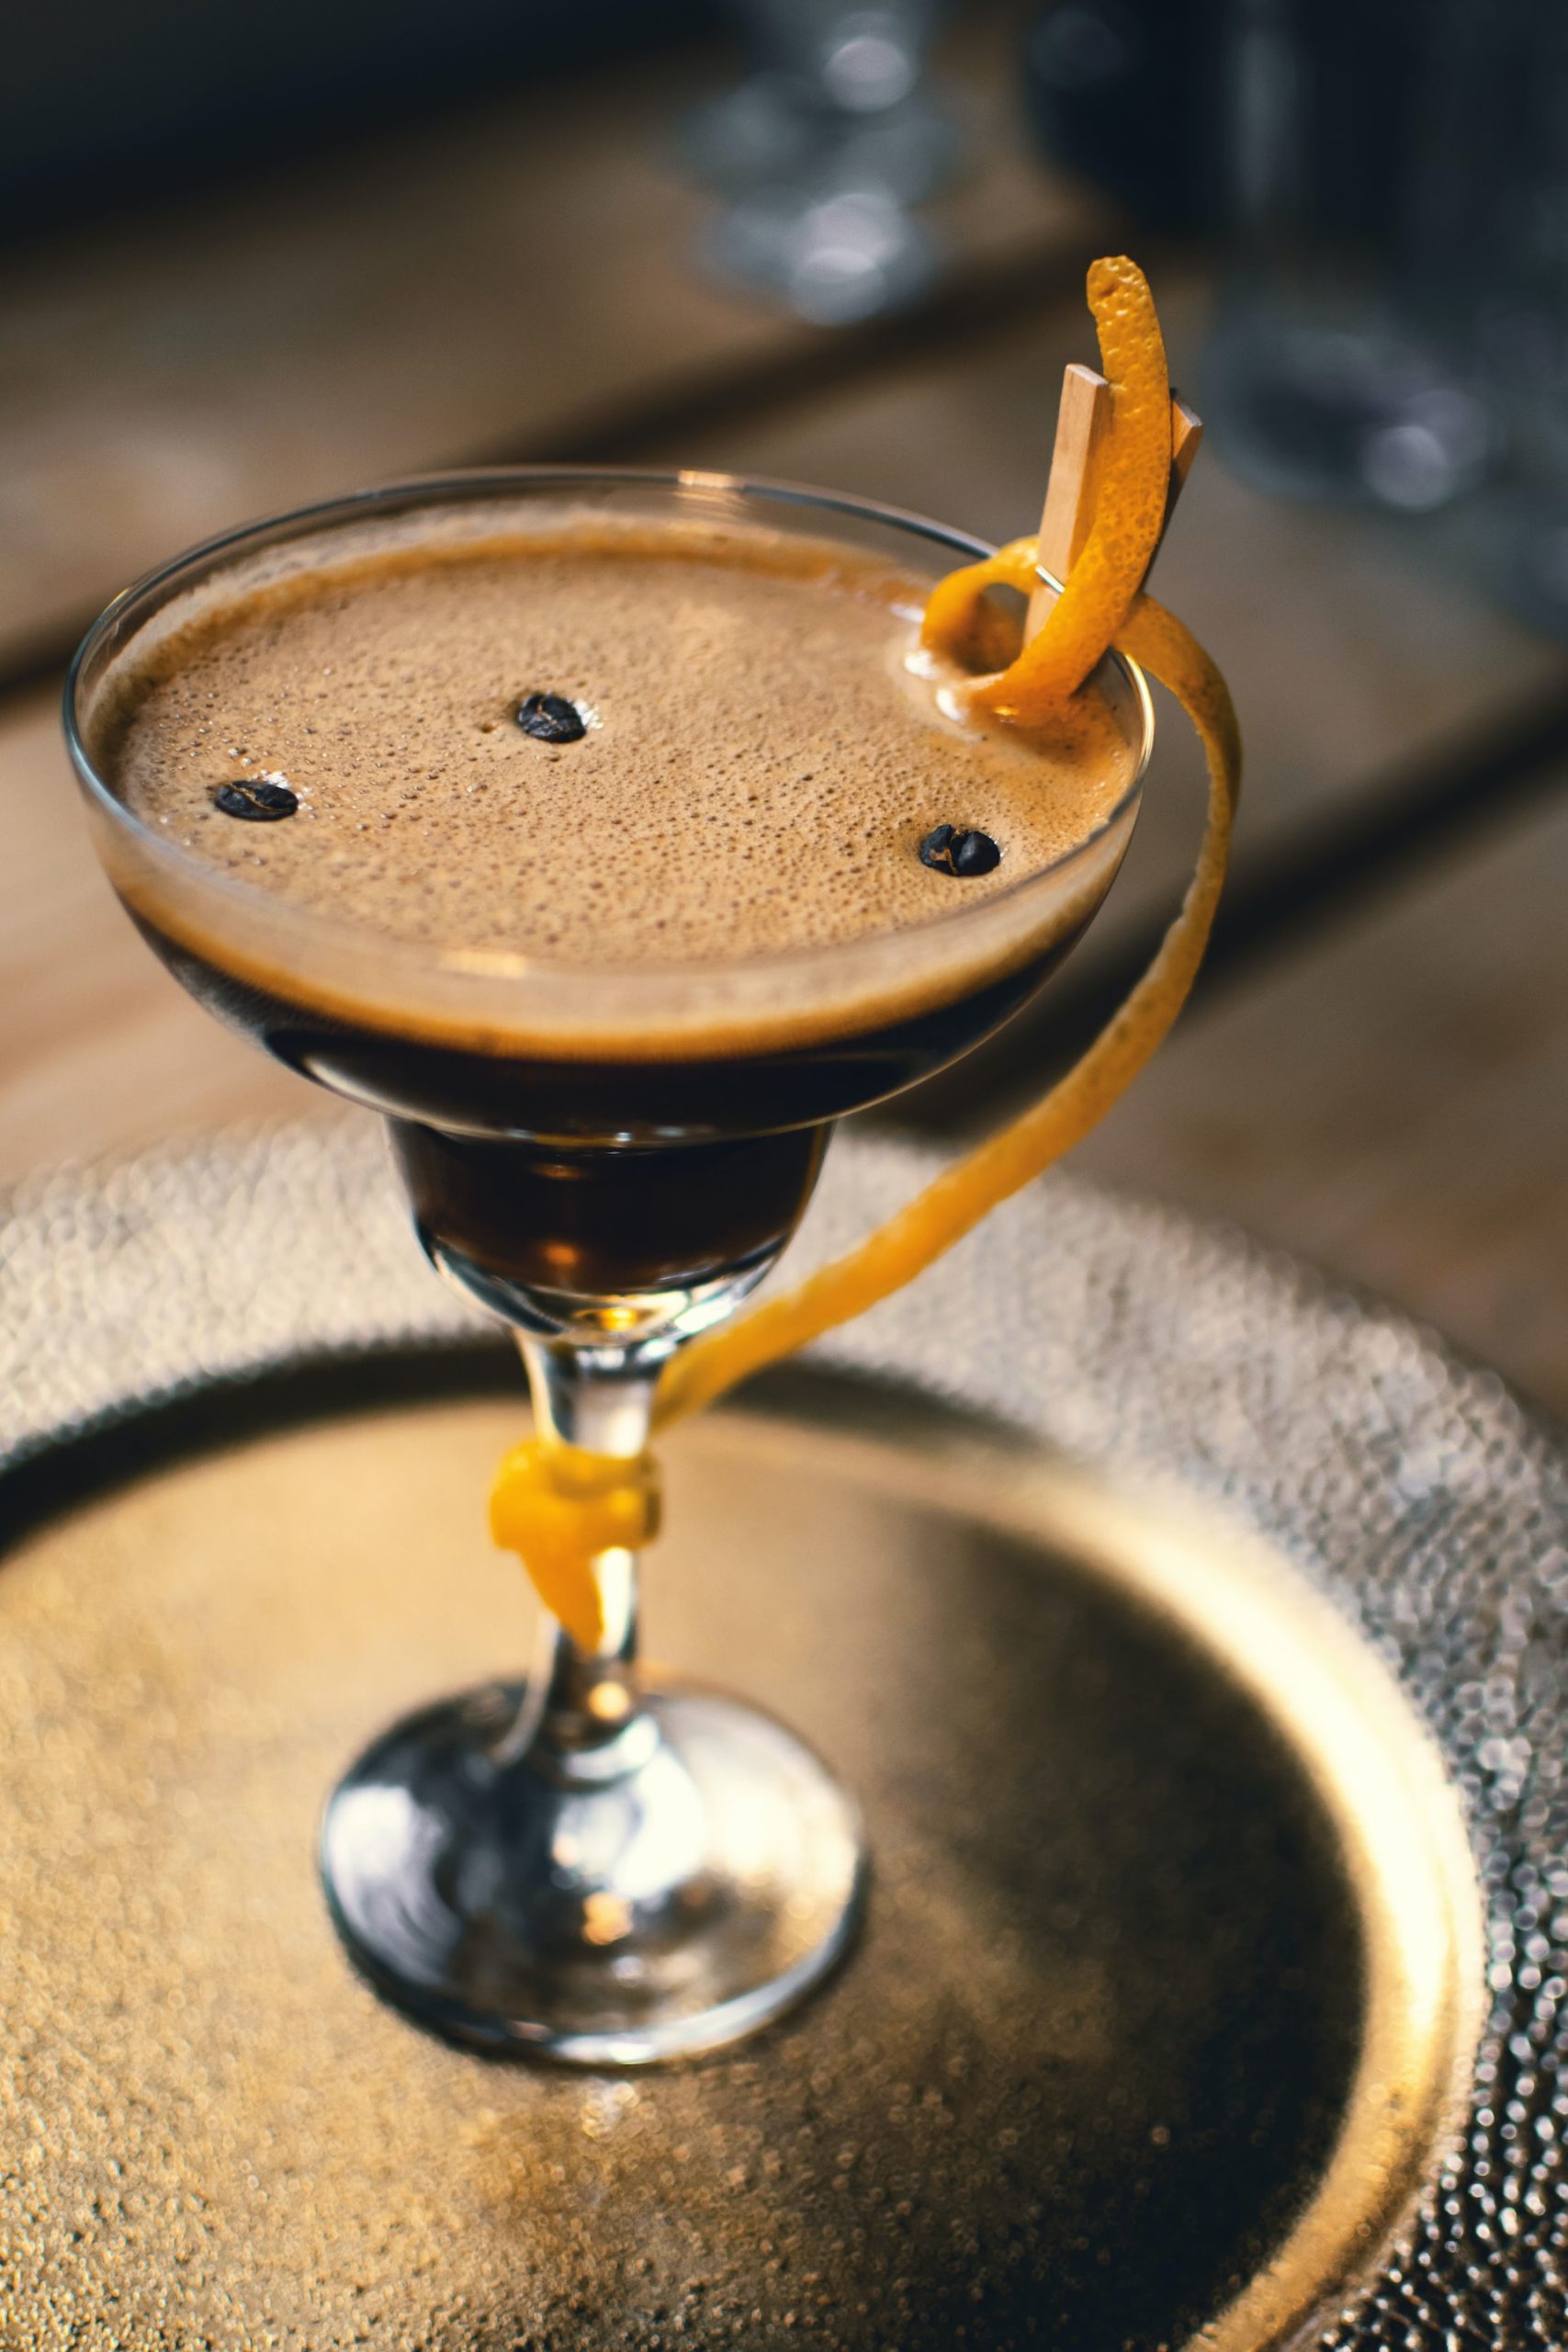 A whiskey-based coffee cocktail with Bénédictine garnished with a thinly sliced orange peel.